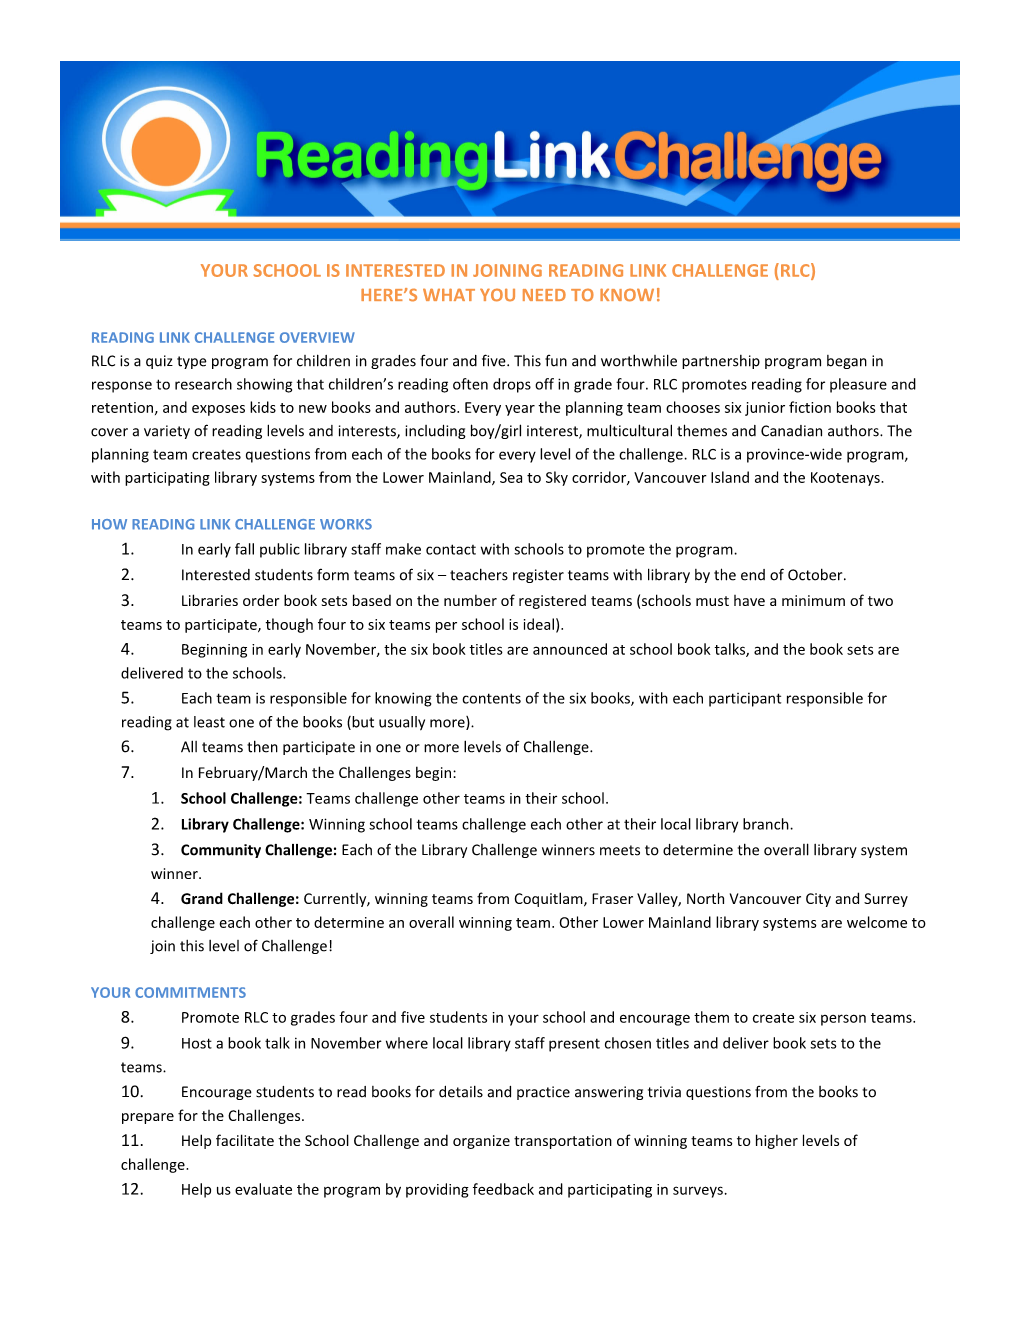 Your School Is Interested in Joining Reading Link Challenge (Rlc)